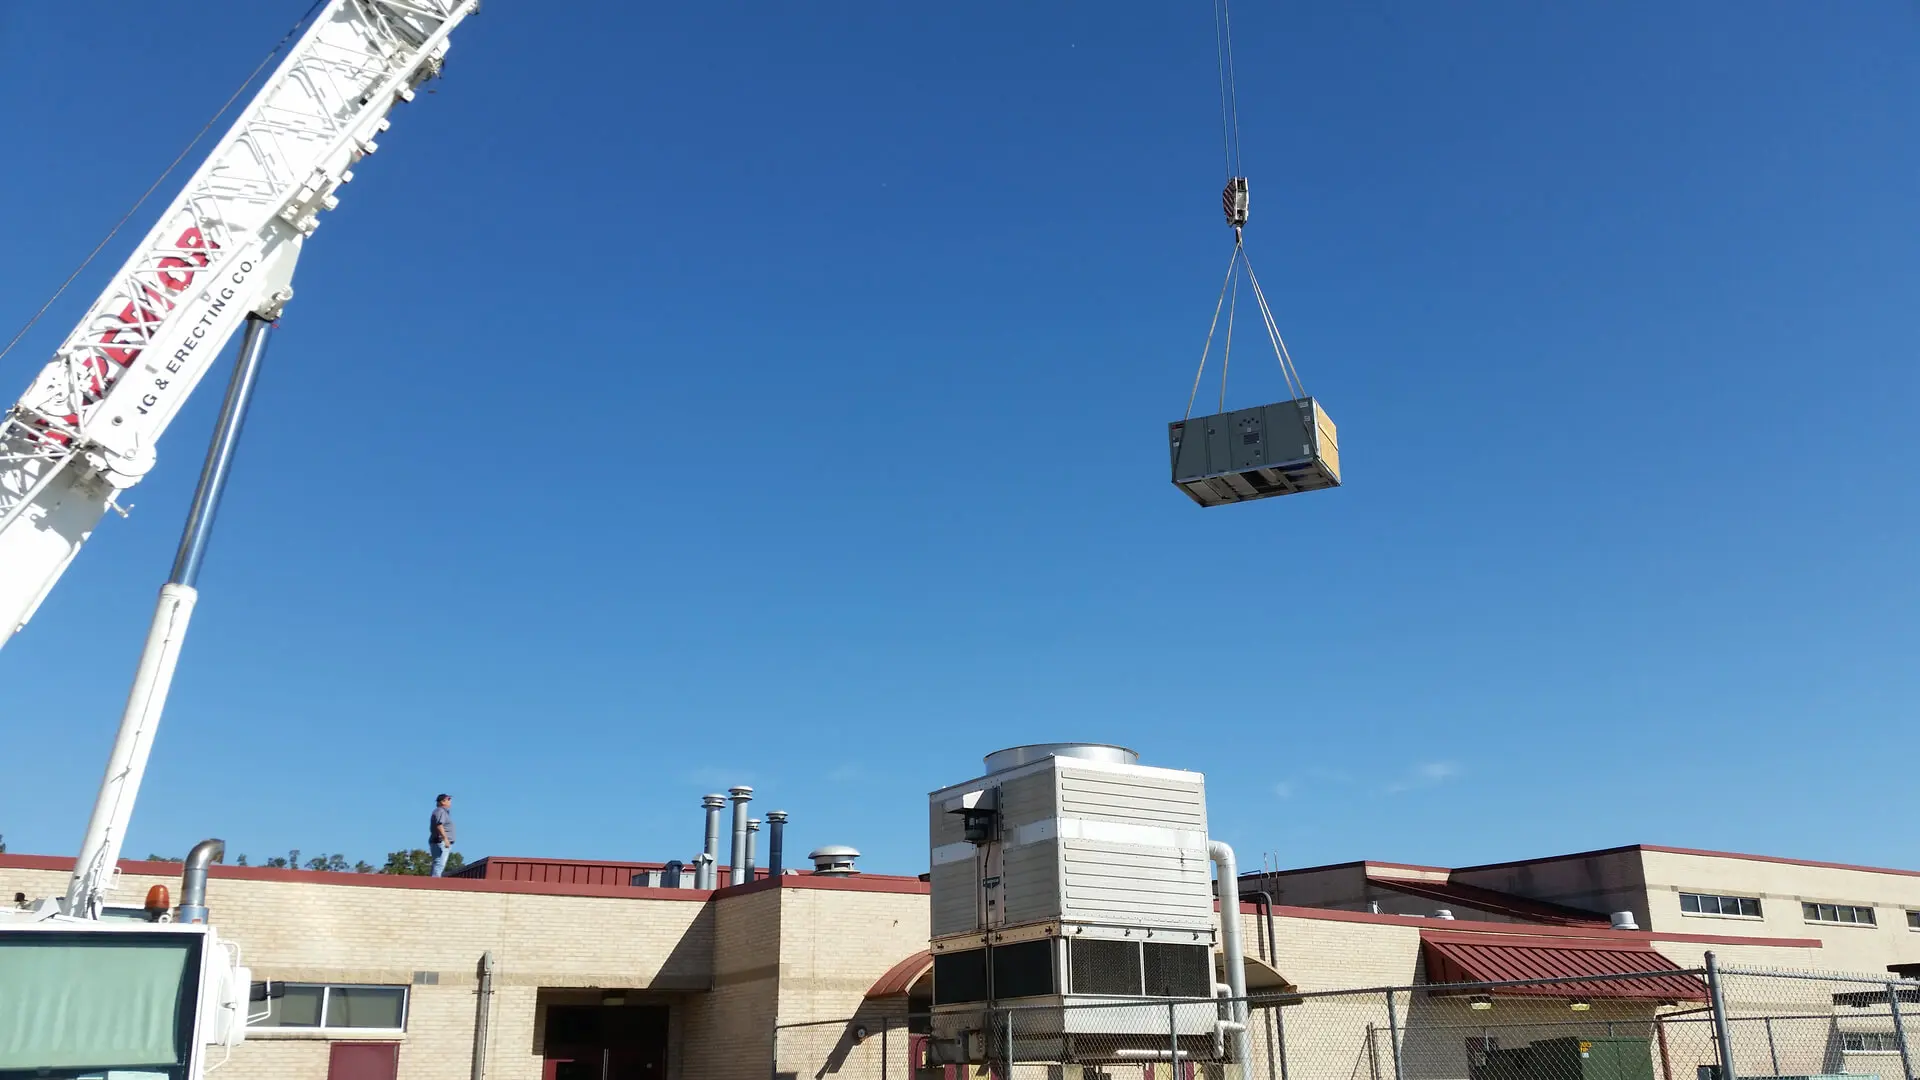 A crane is lifting a large box onto the roof of a building.